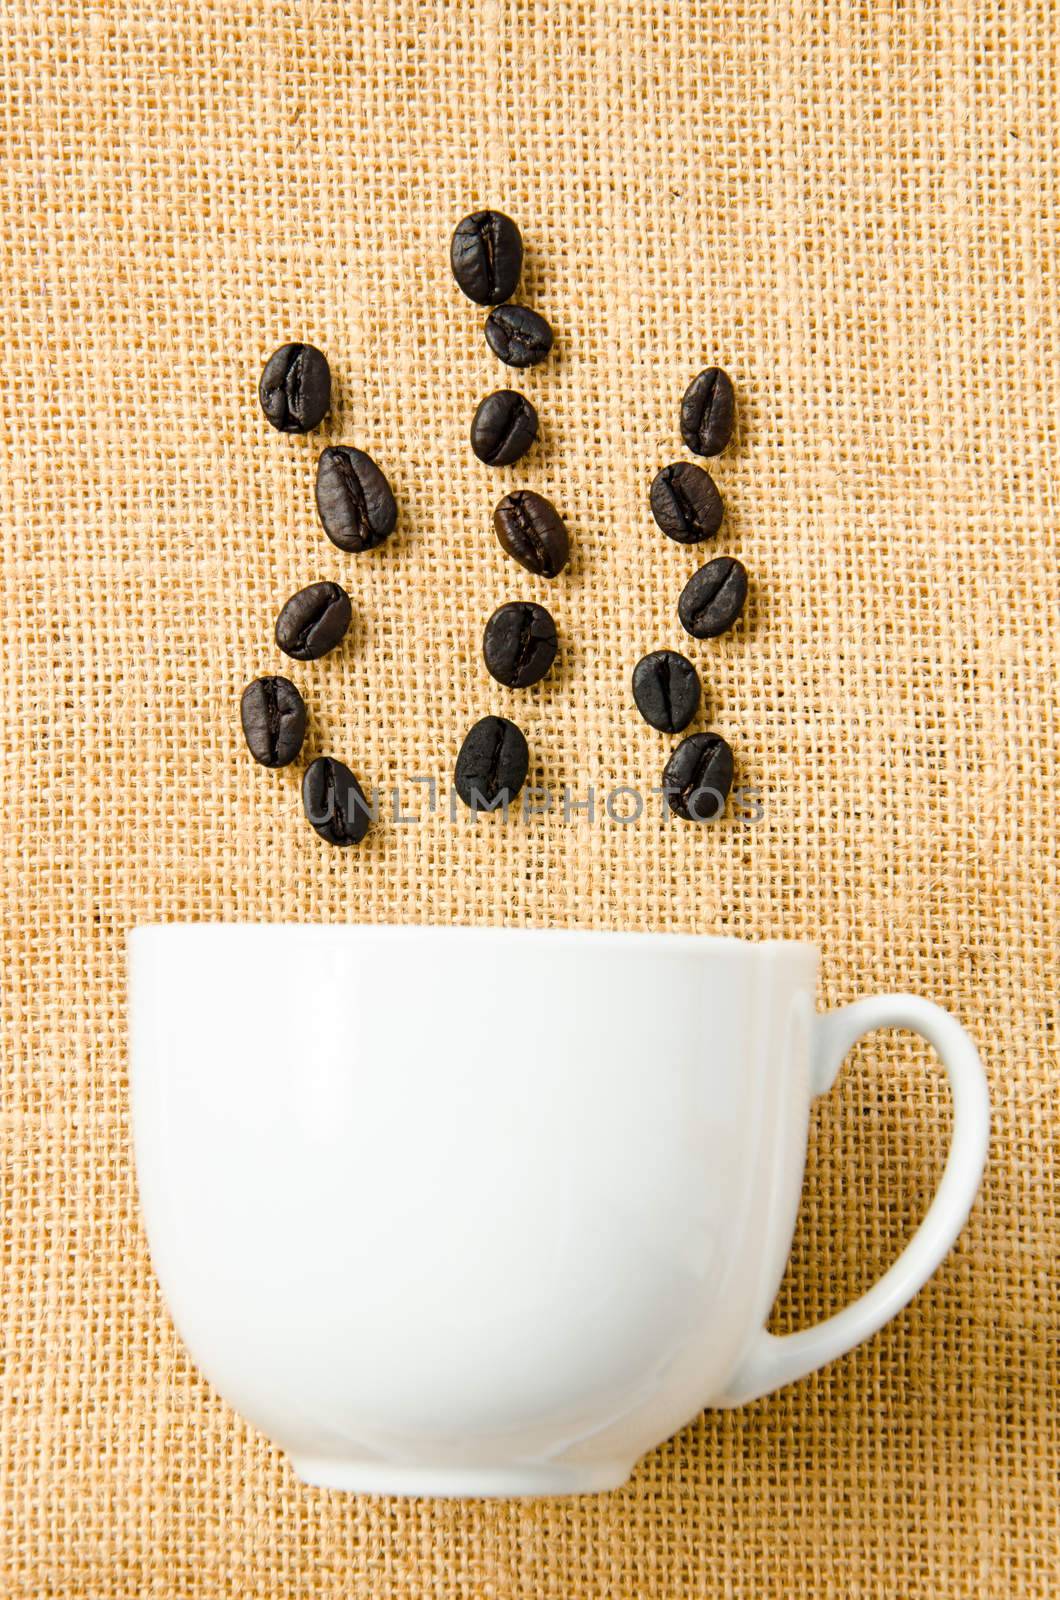 seed coffee and cup coffee on sack background